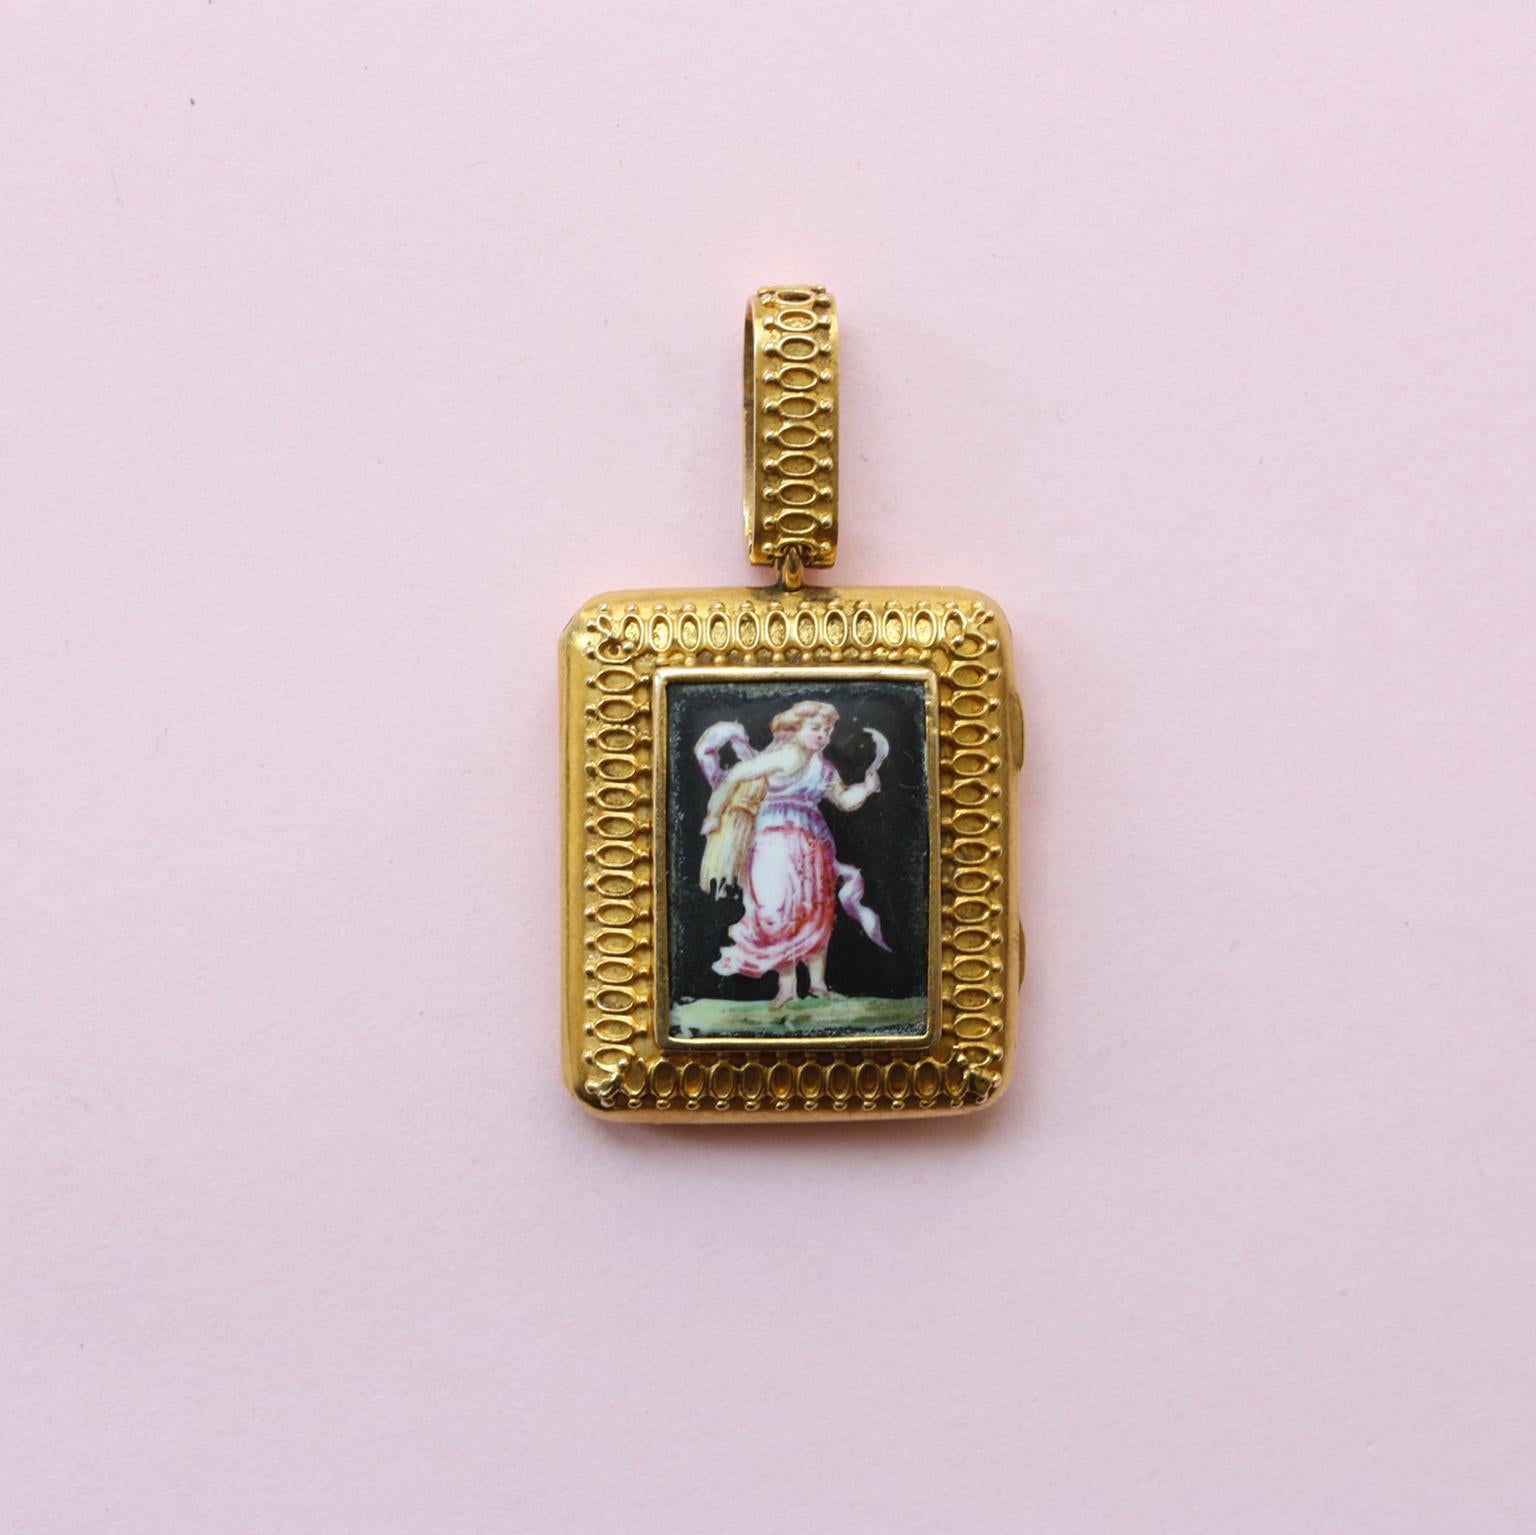 An 18 carat gold neo-classical rectangular locket with a porcelain plaque of Demeter harvesting grain, a border and large hoop with gold wire with one glassed and hinged compartment, France, marked with a tête de cheval and masters mark, circa